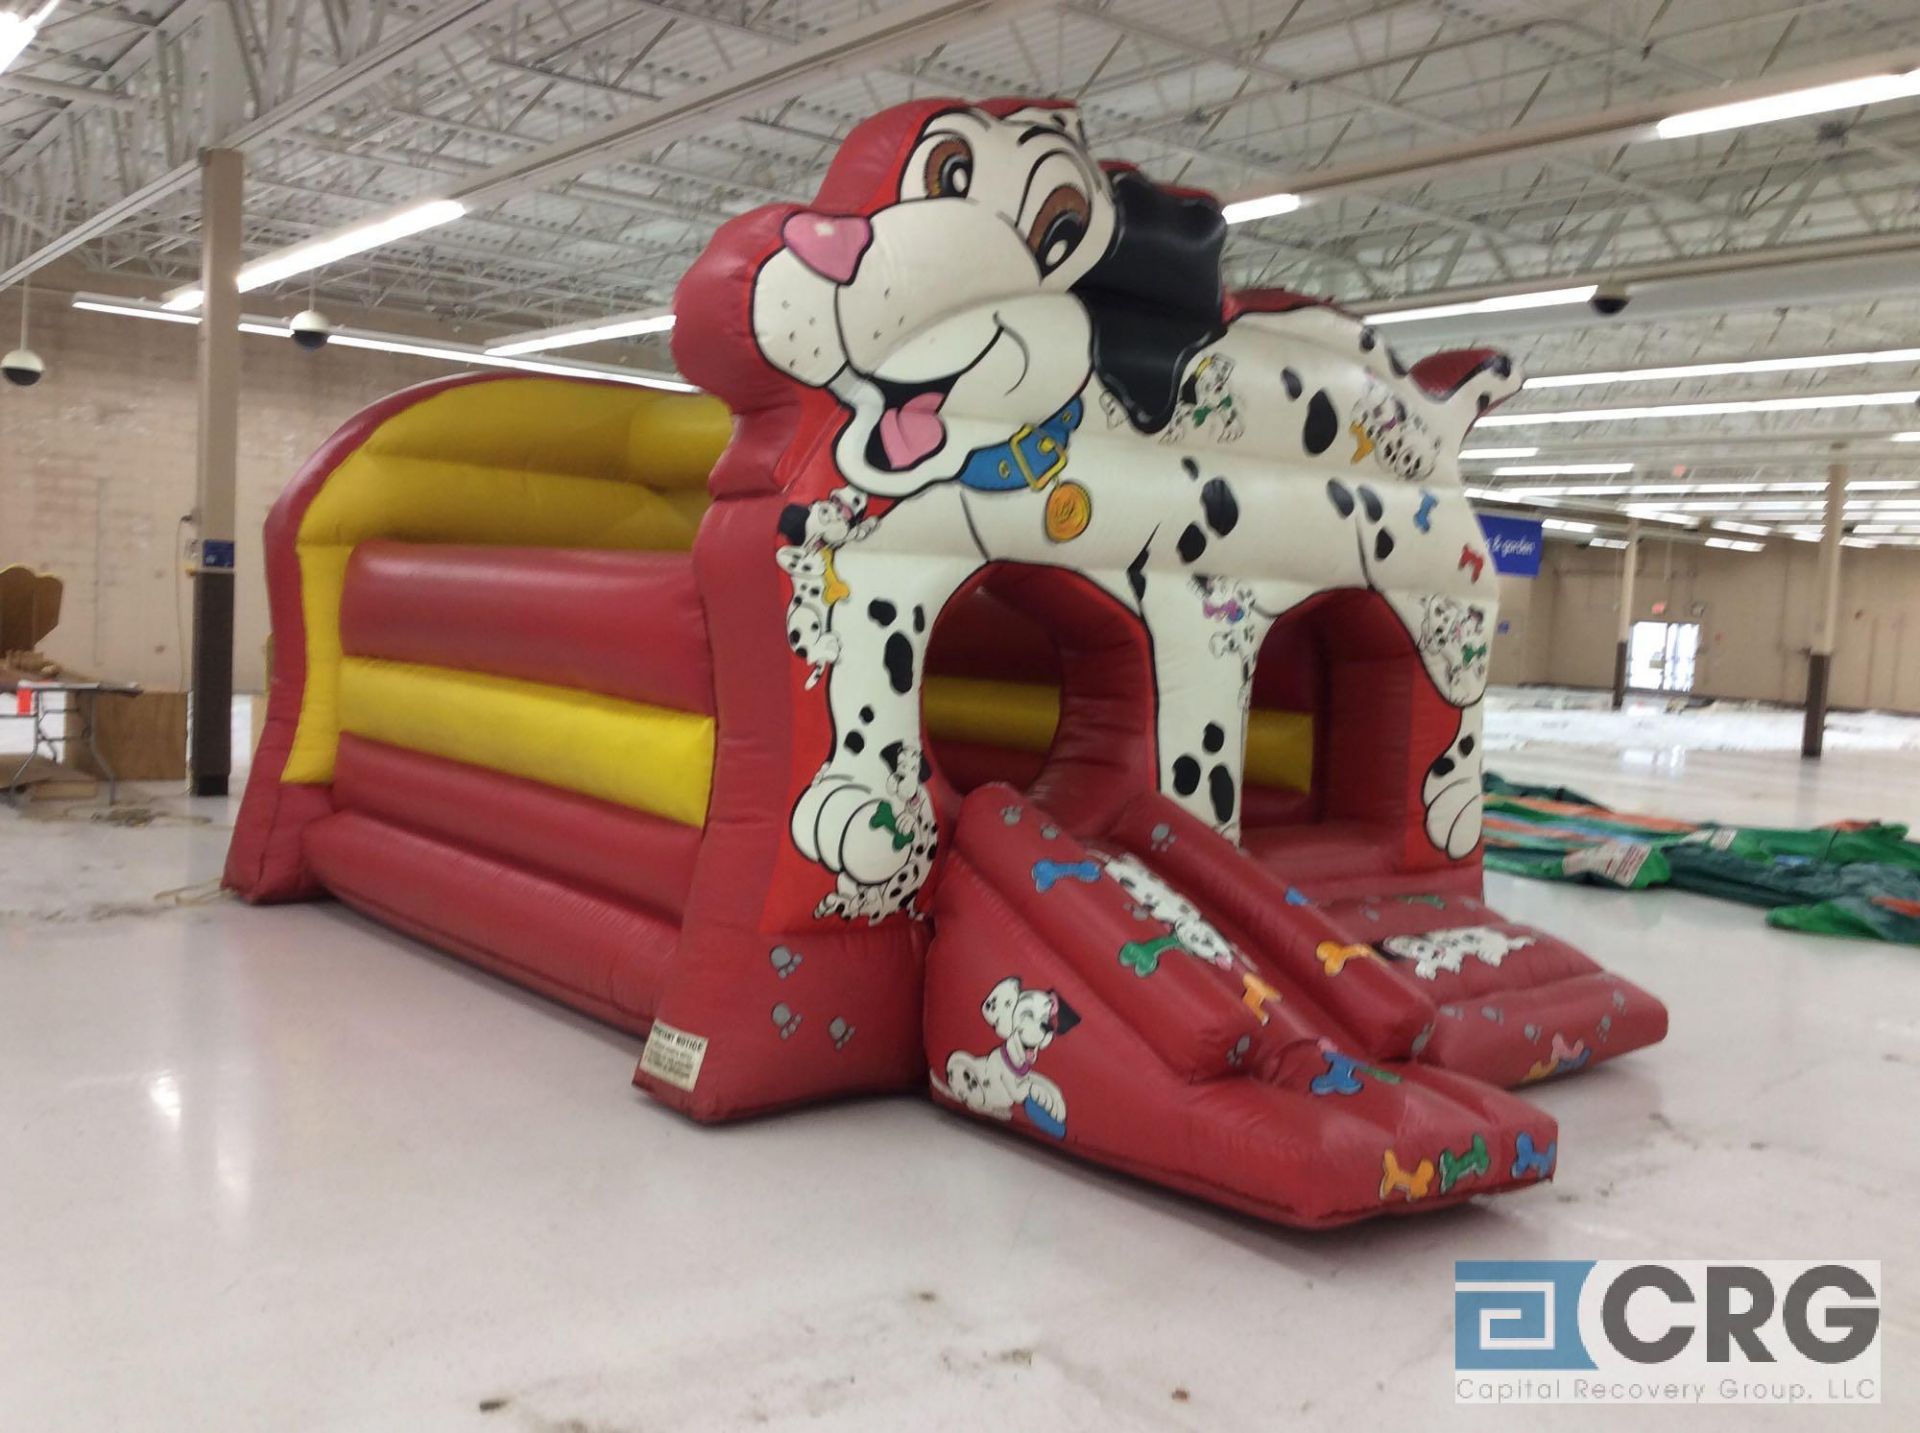 Doggie slide inflatable bounce house, with blower.